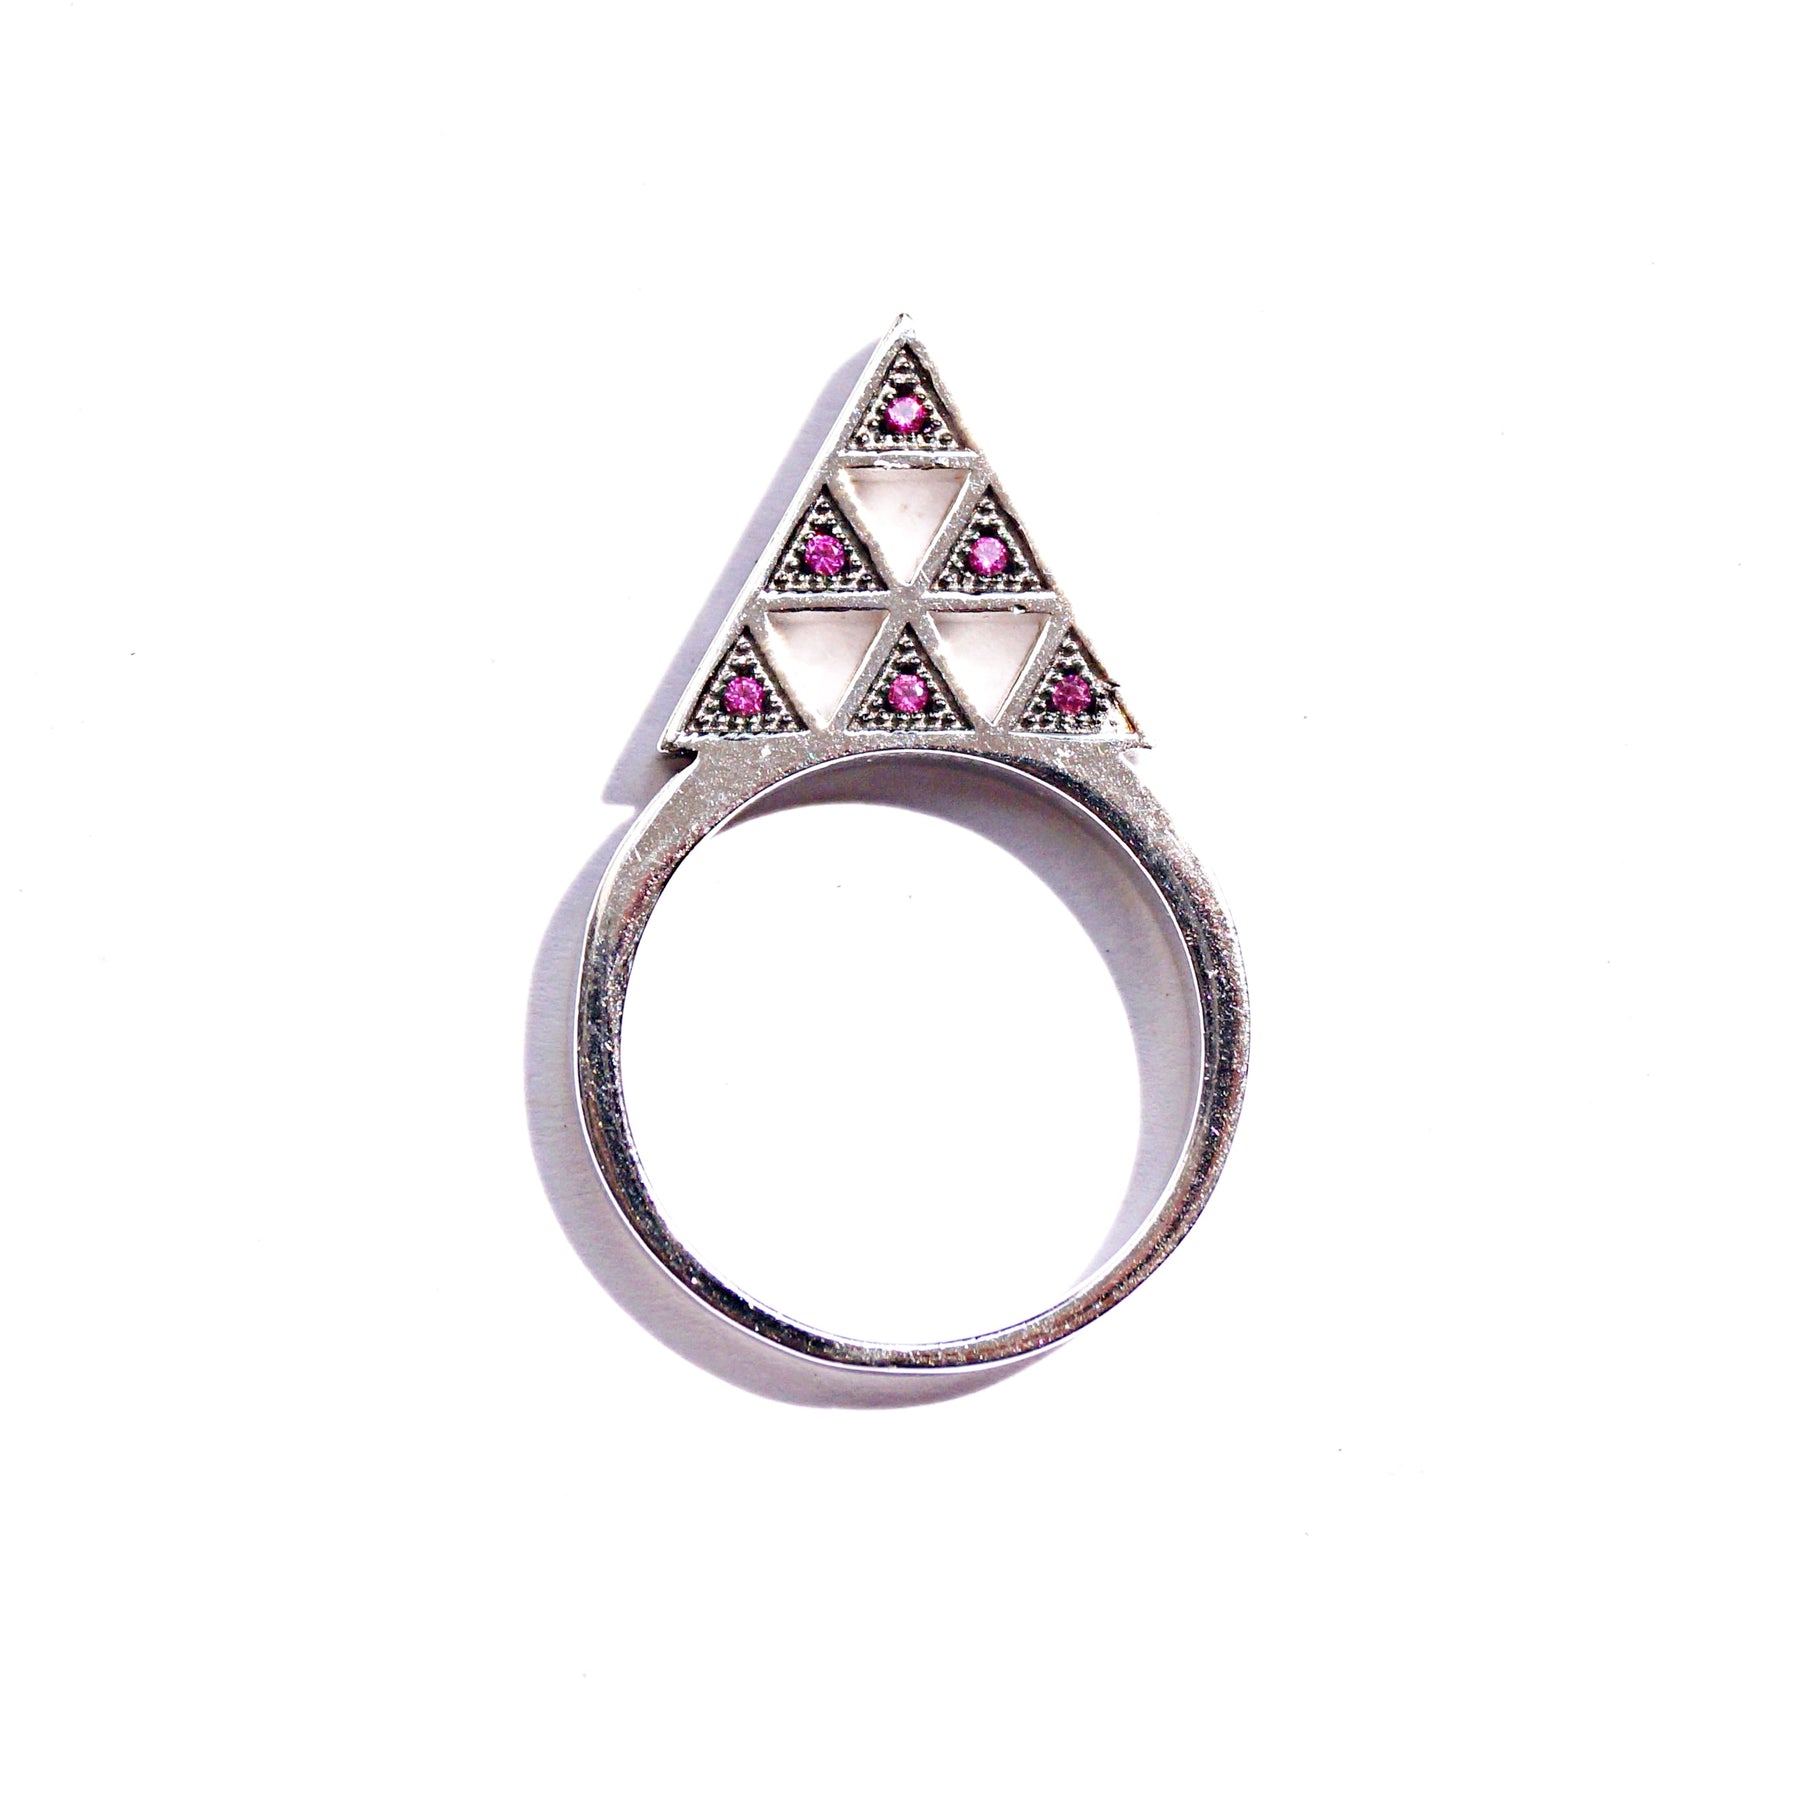 The Defensive Pyramid Fancy Ring